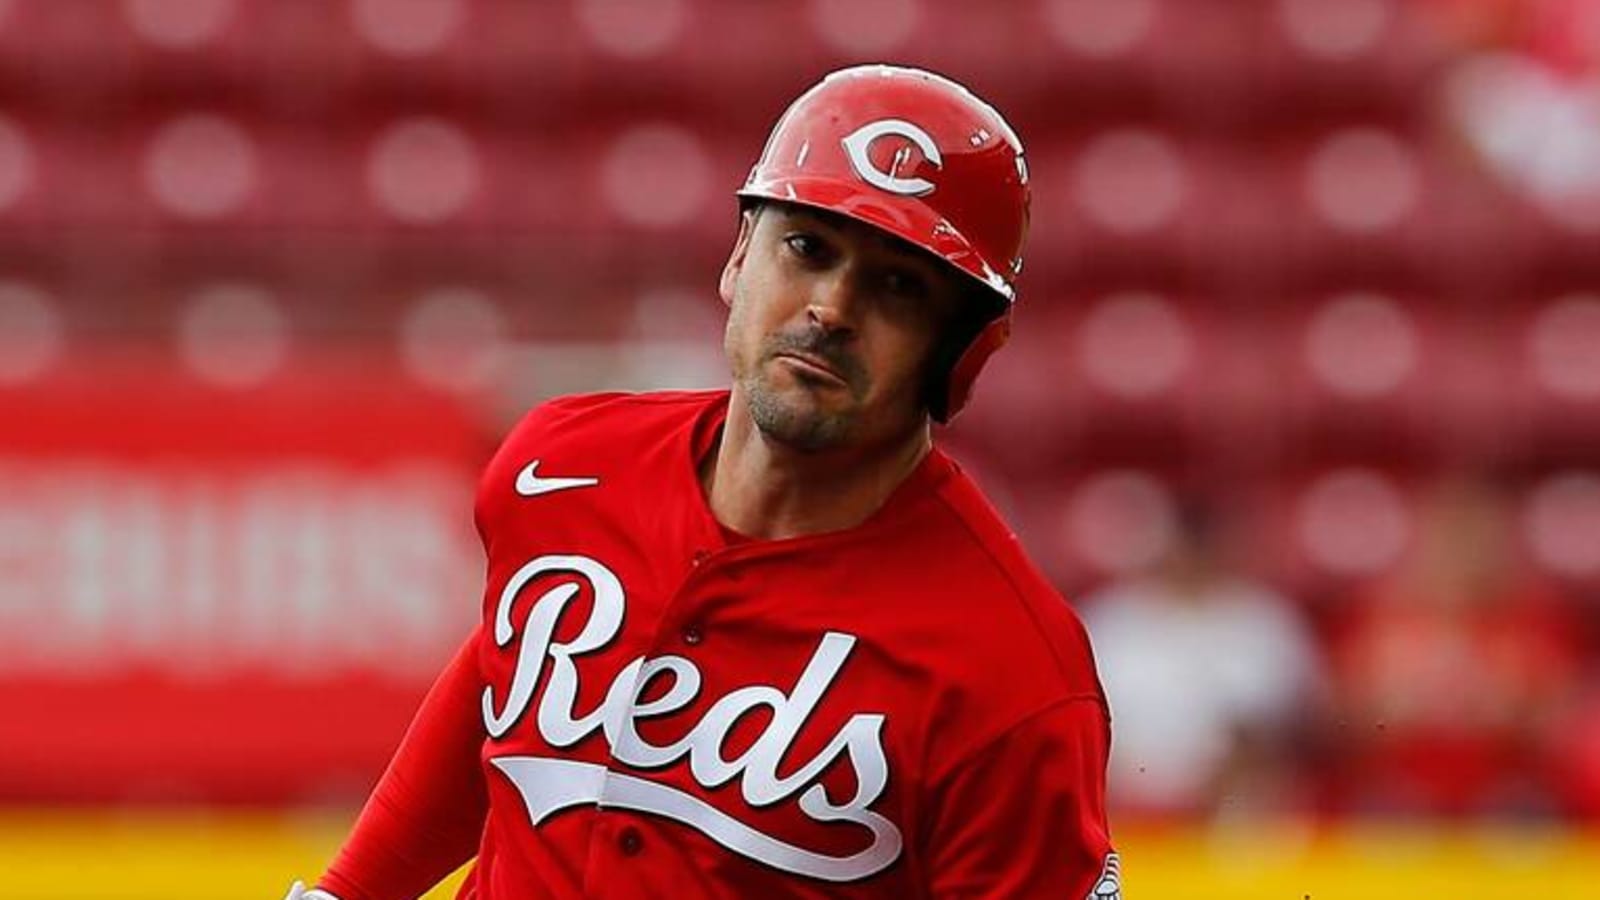 Reds score 20 runs in win over Cubs, most since 1999 Yardbarker